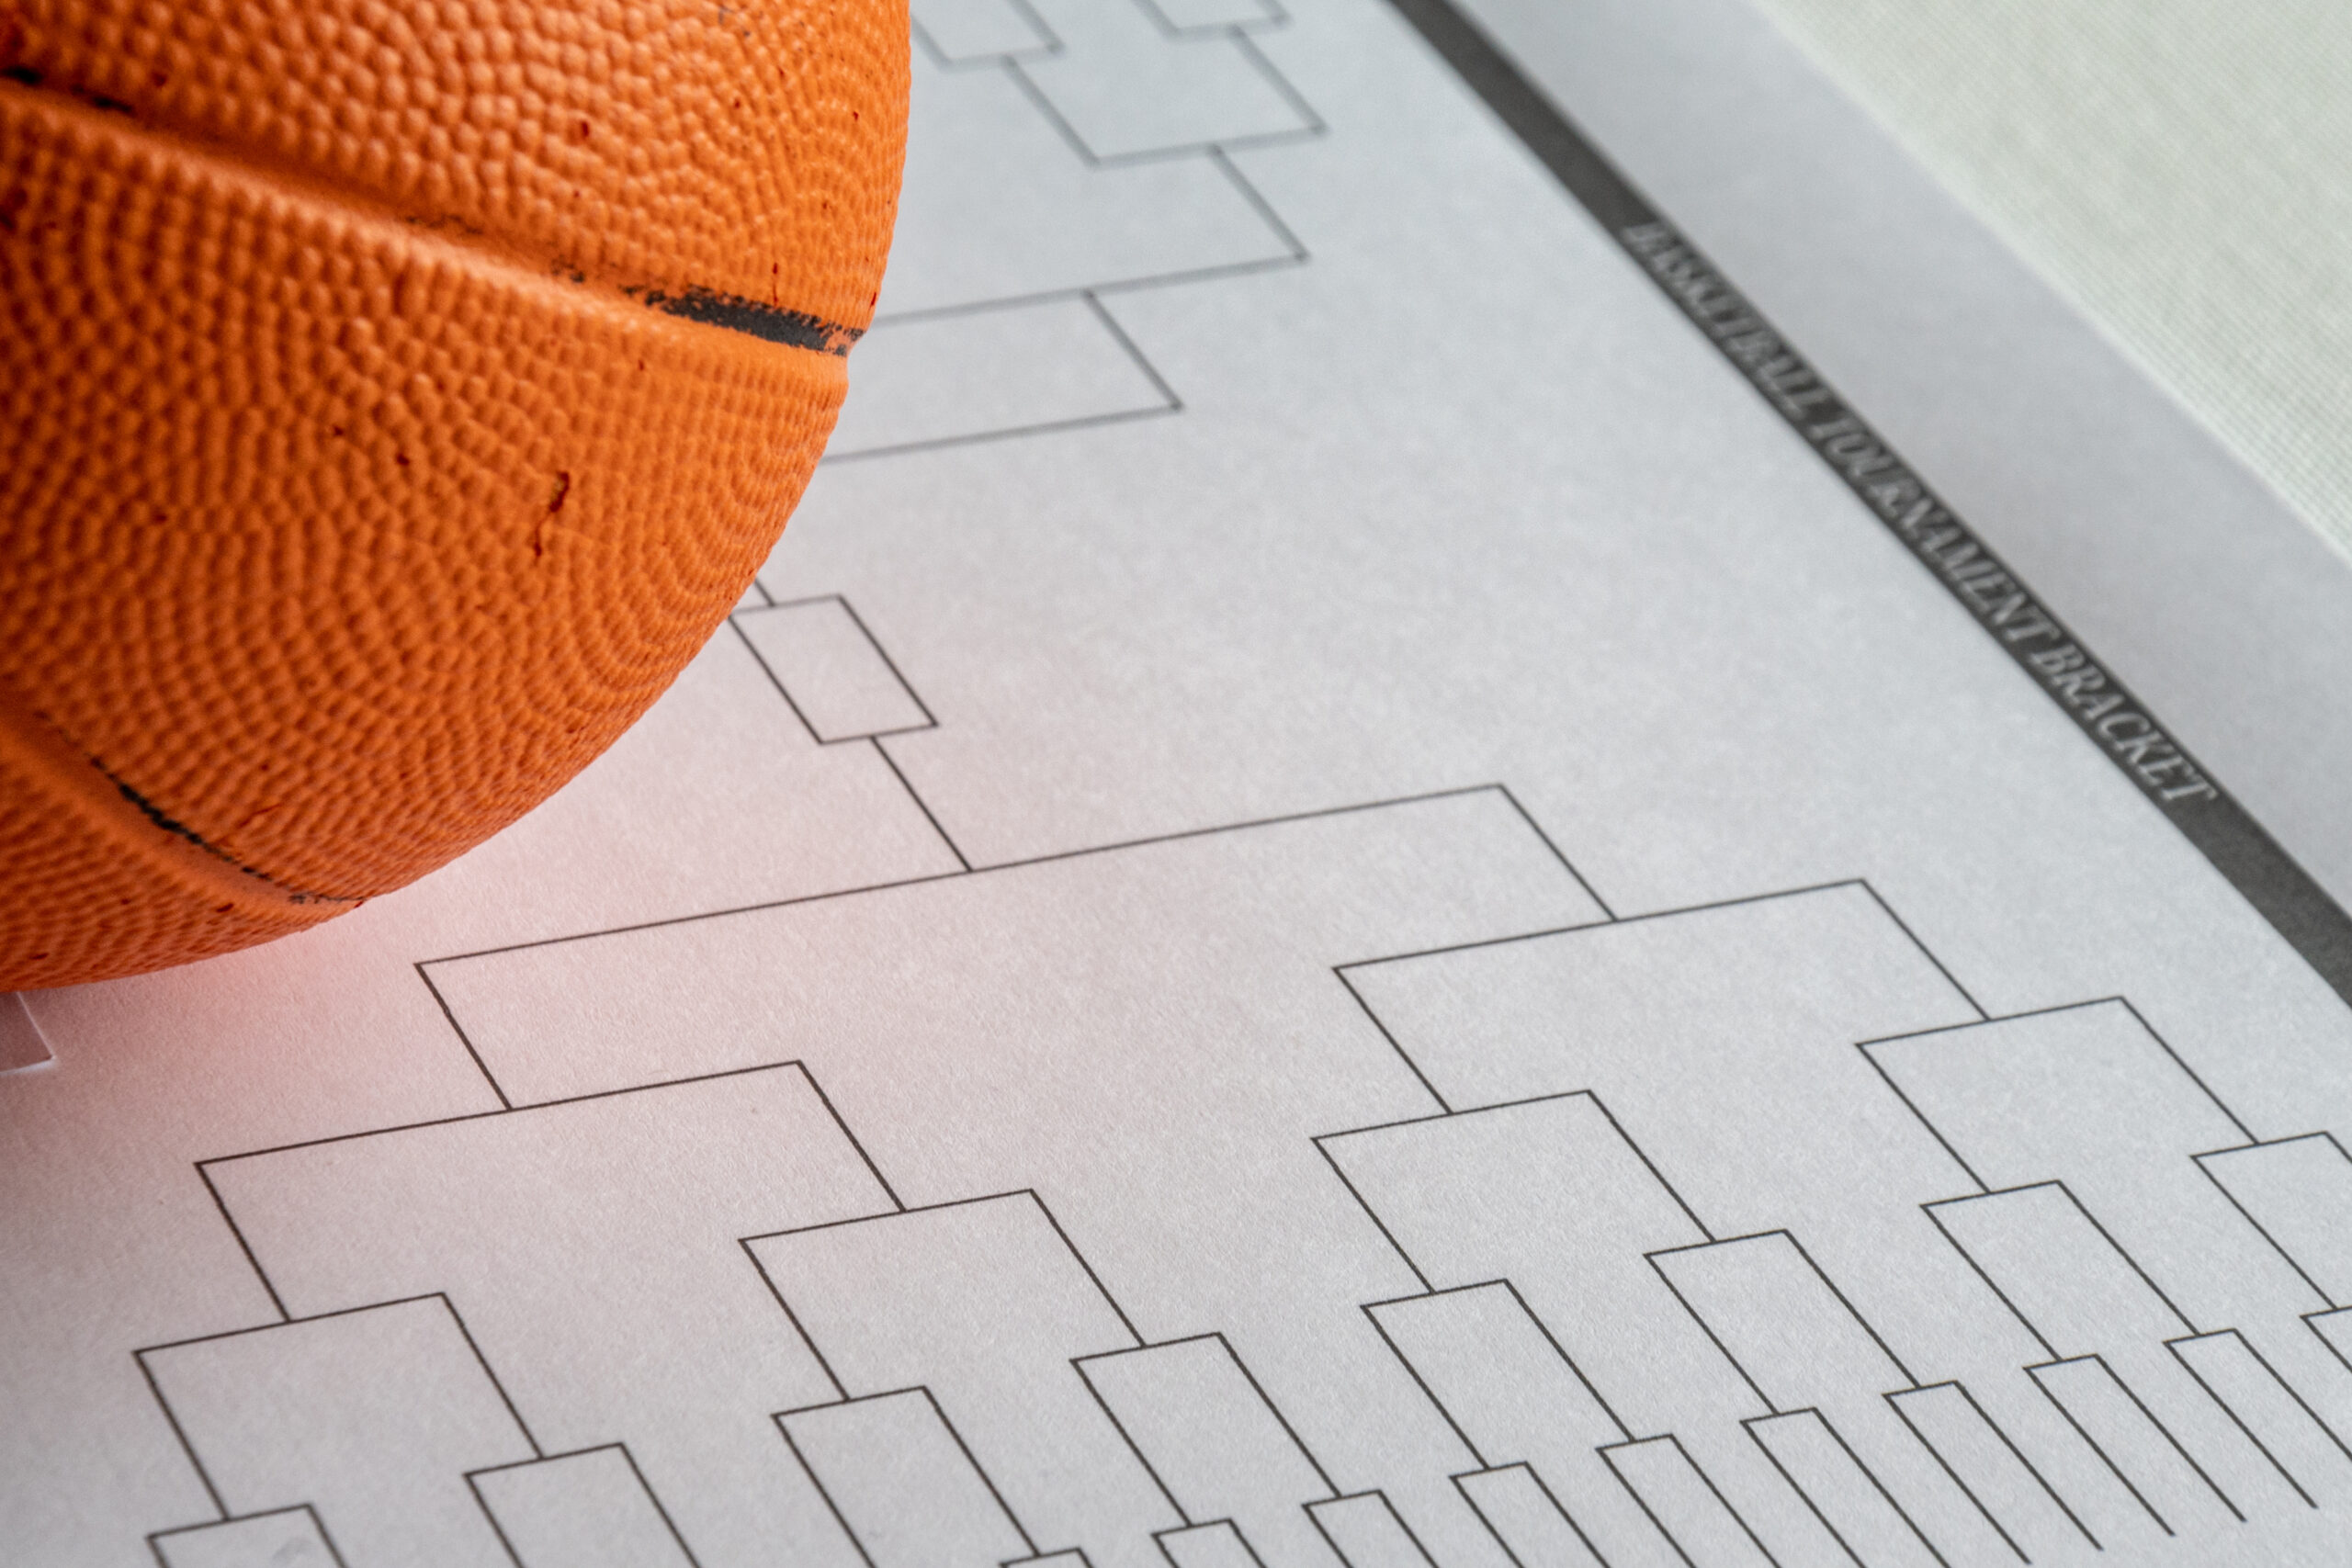 Blank Bracket Grid On White Paper With Basketball On Top